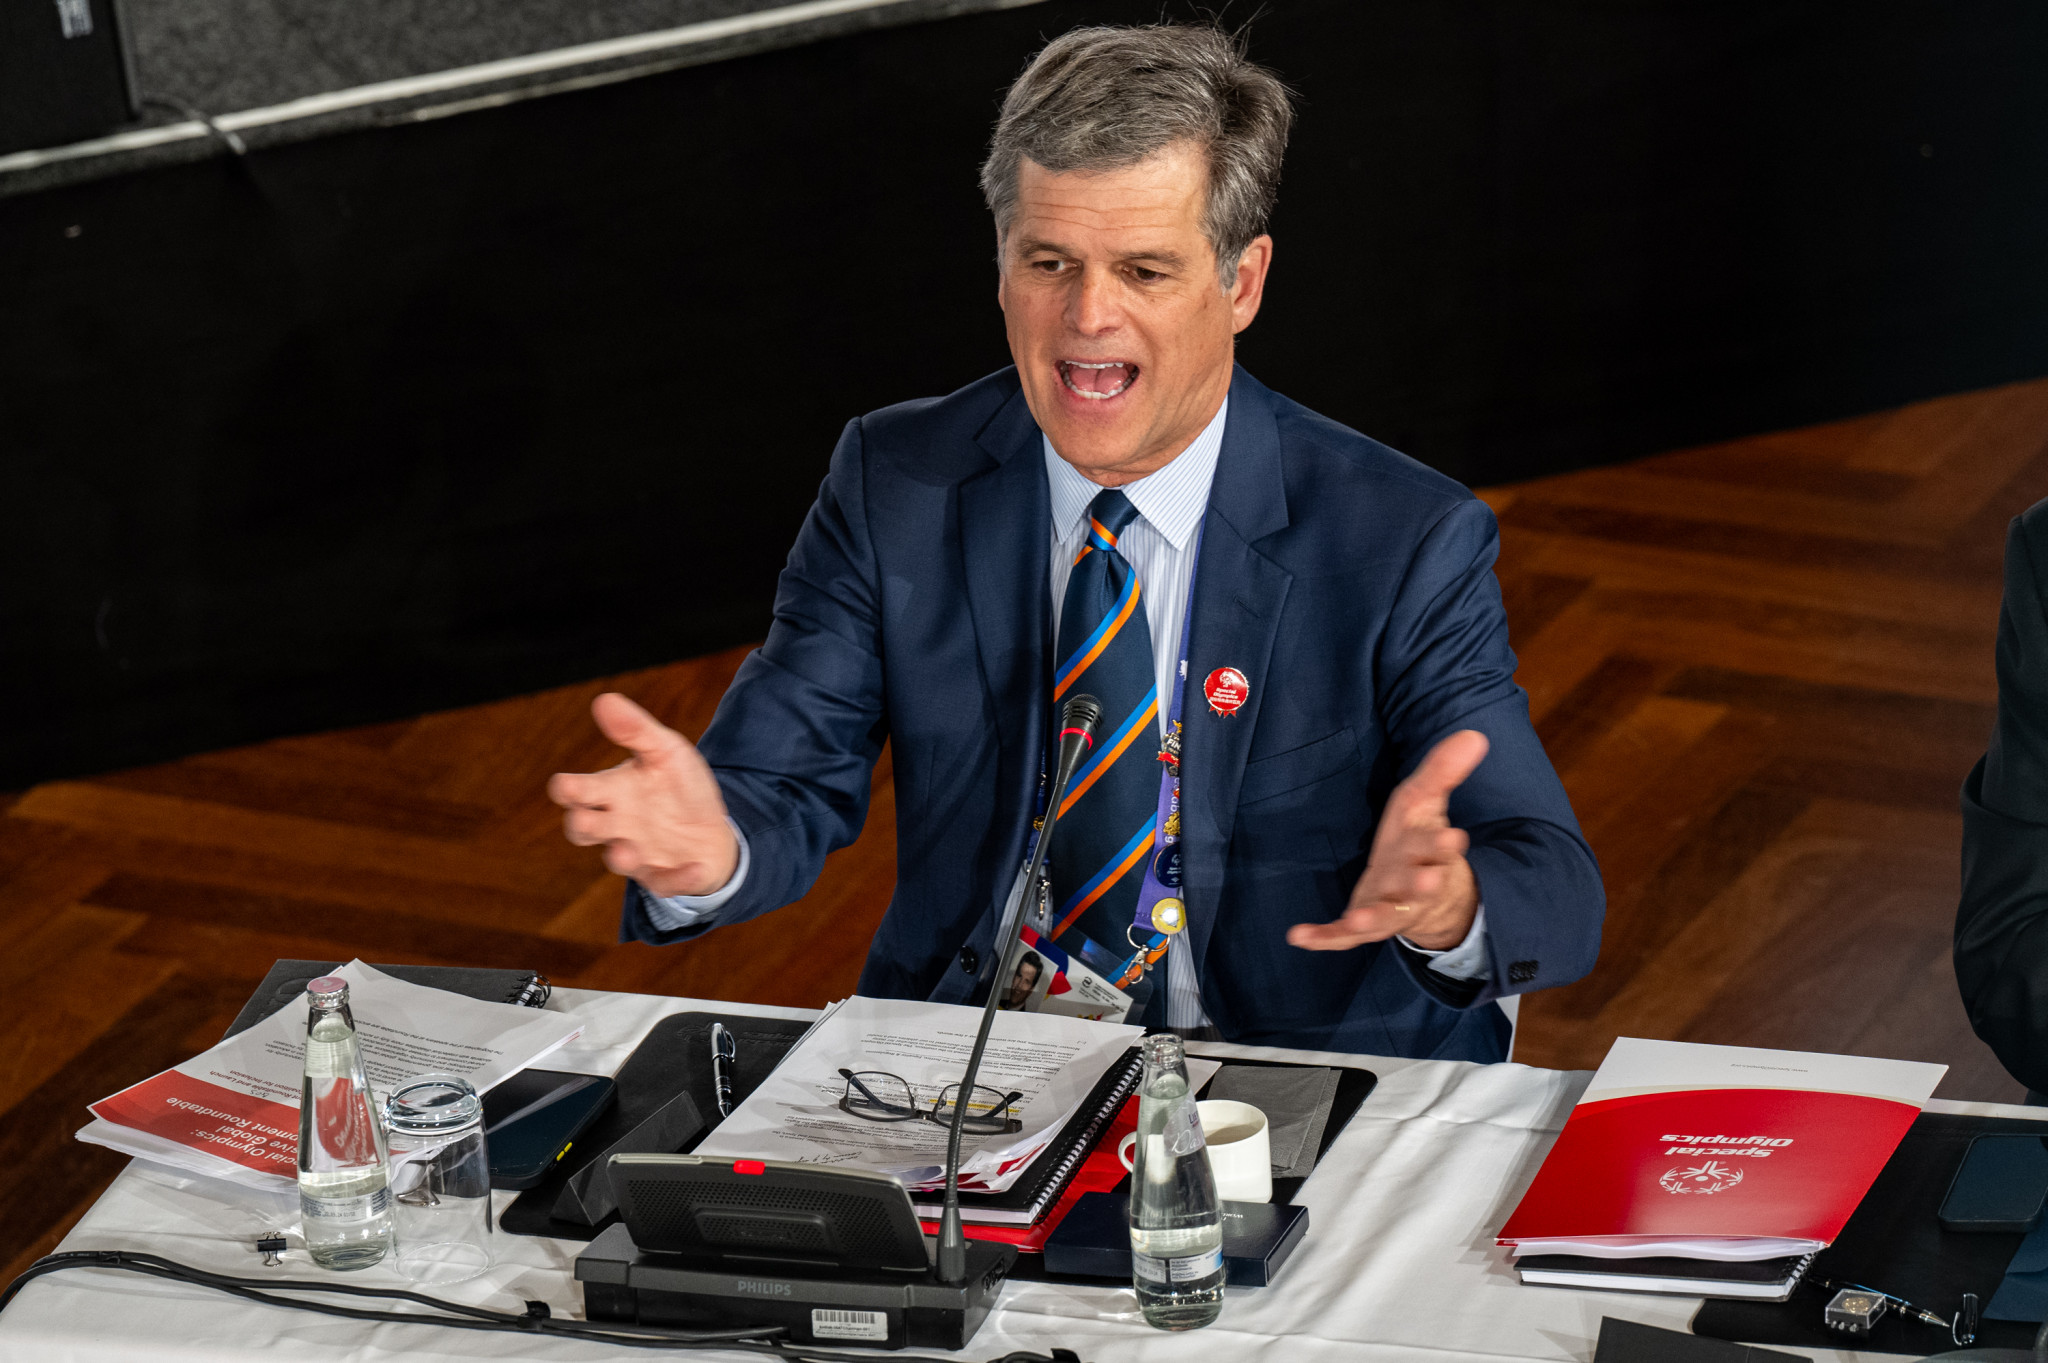 Special Olympics International chair Timothy Shriver believes the launch of the Coalition will put 